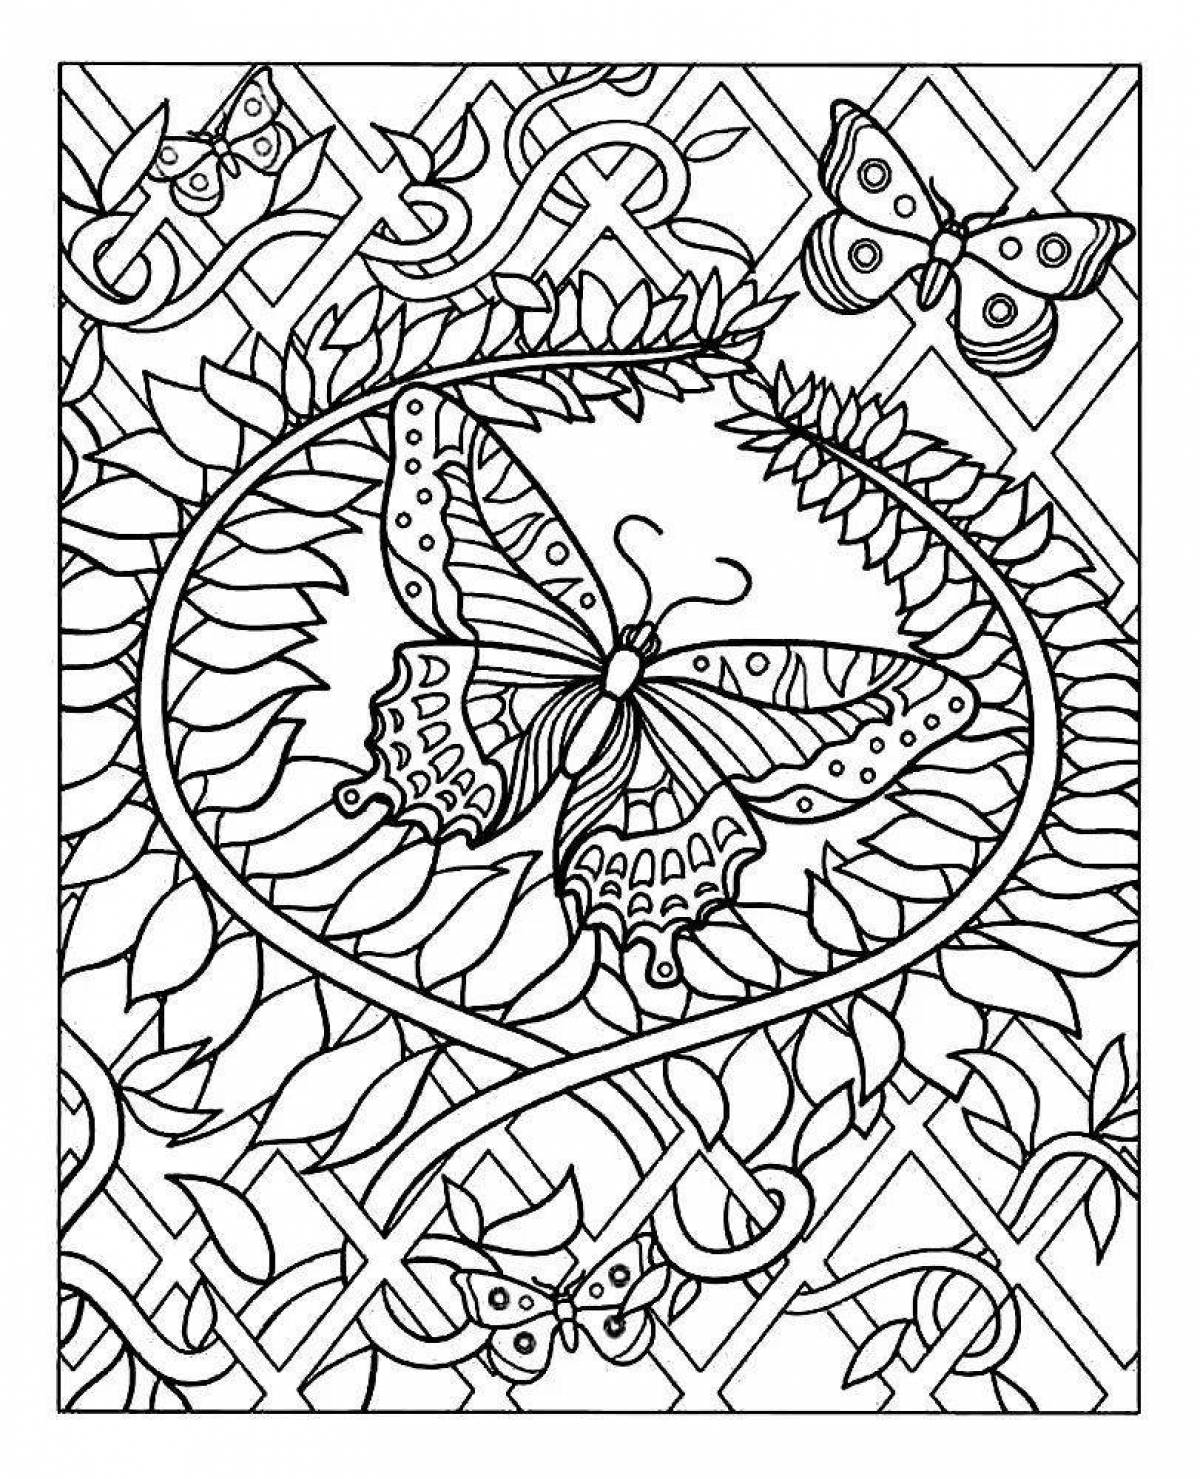 Colourful coloring art therapy for teenagers